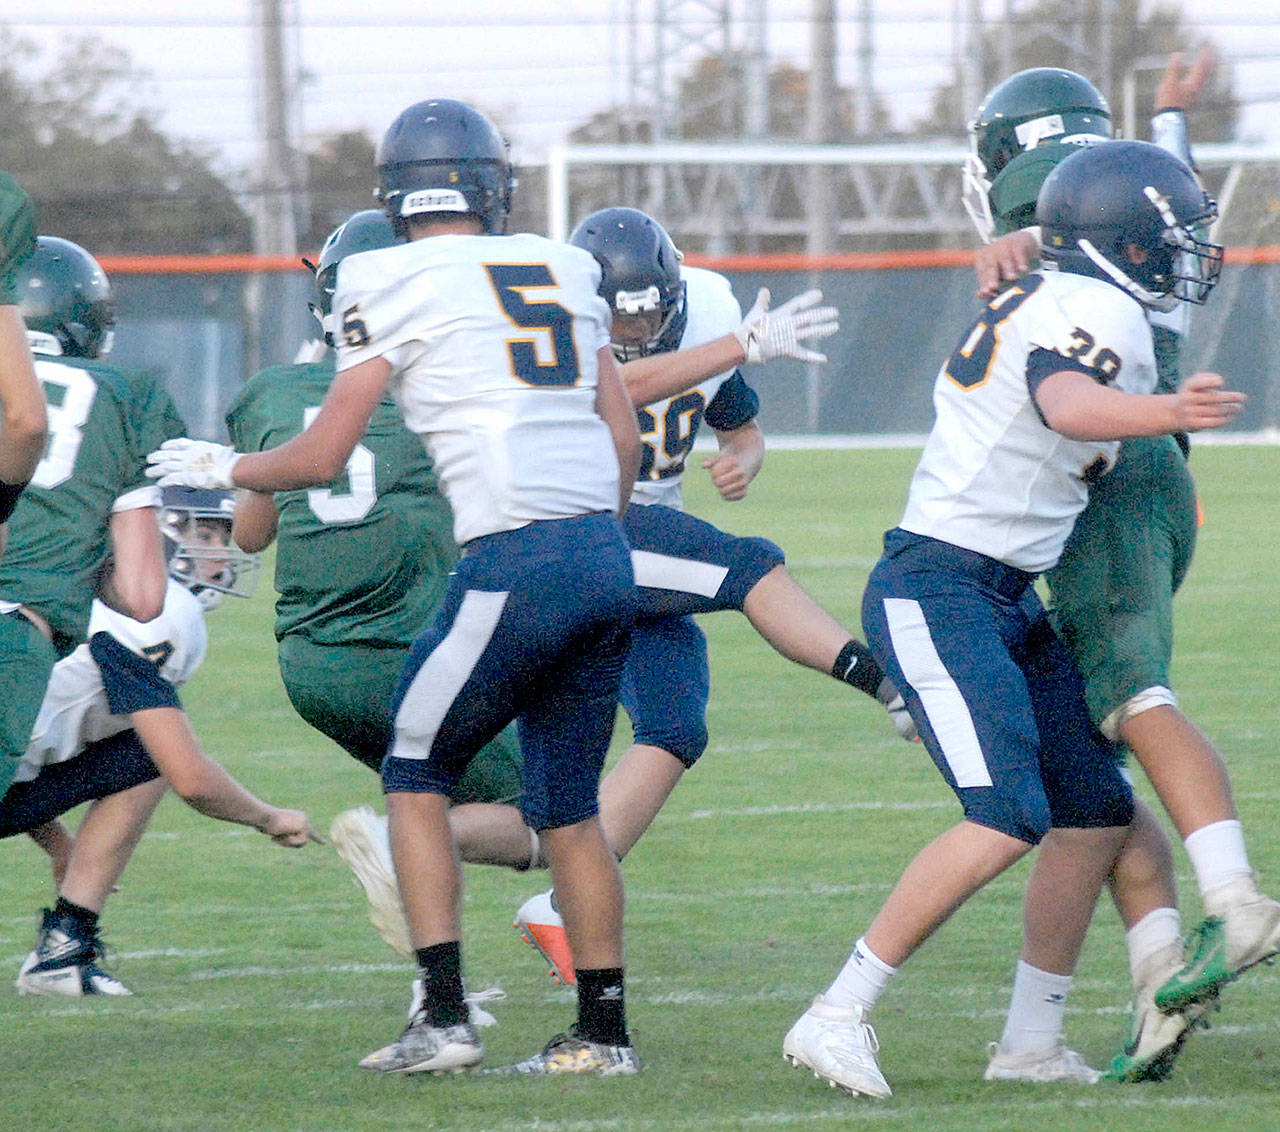 Forks placekicker Ethan Bello, center, boots a 35-yard field goal during a game against Port Angeles earlier this month. Bello went 4 for 4 on field goals and 4 of 5 on point-after attempts during Forks’ 46-20 win over Port Townsend last Friday. (Keith Thorpe/Peninsula Daily News)